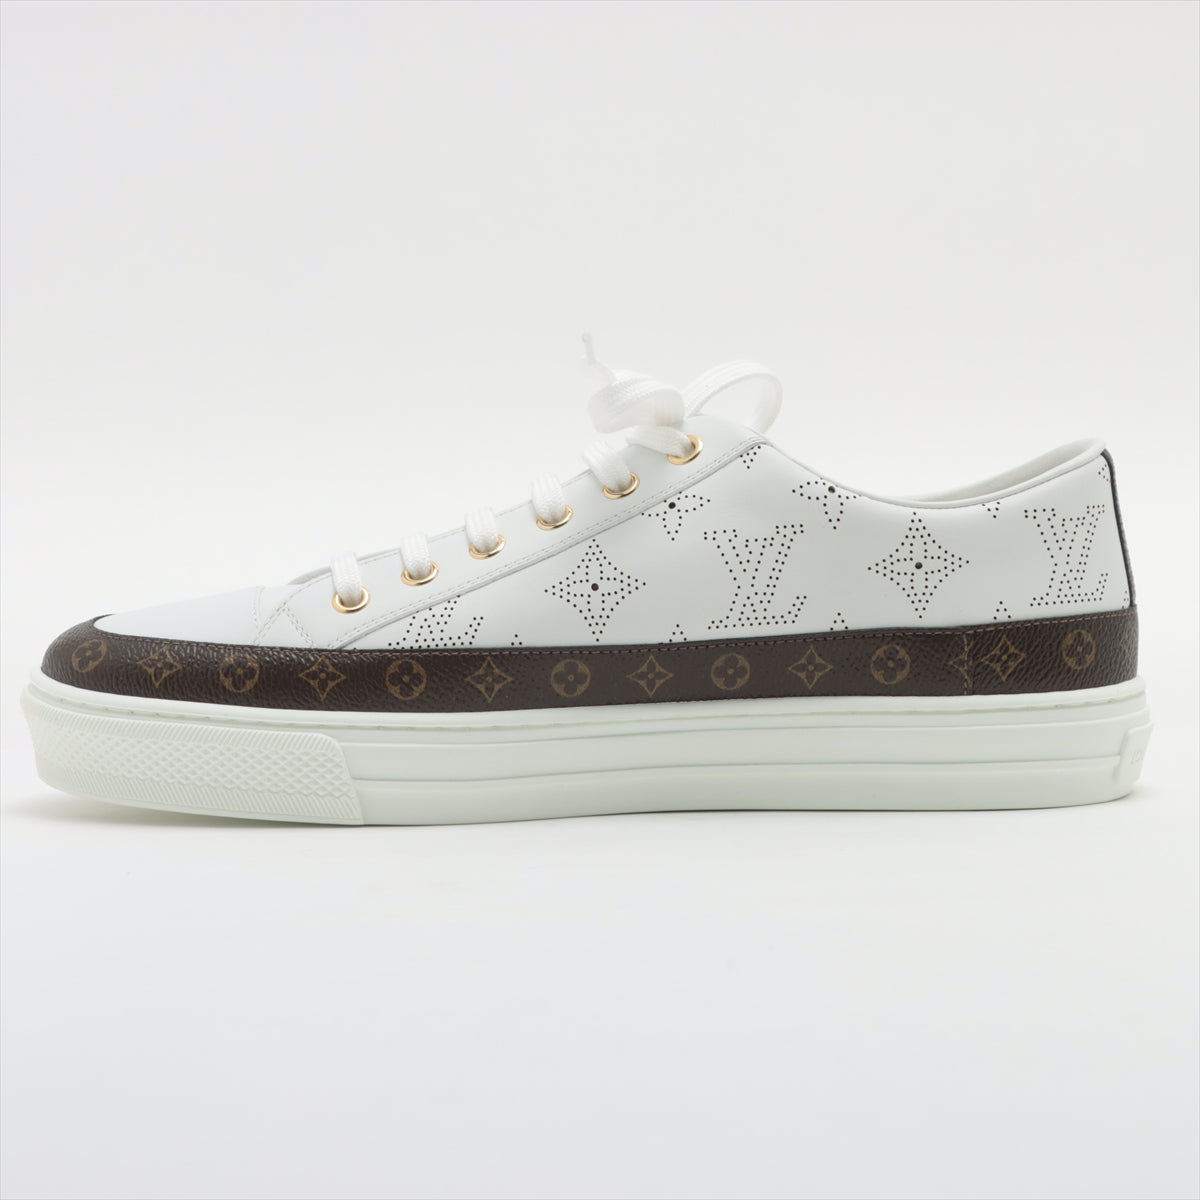 Louis Vuitton Stellar line 20 years PVC & leather High-top Sneakers 40 Ladies' White x brown VL0230 Monogram Is there a replacement string